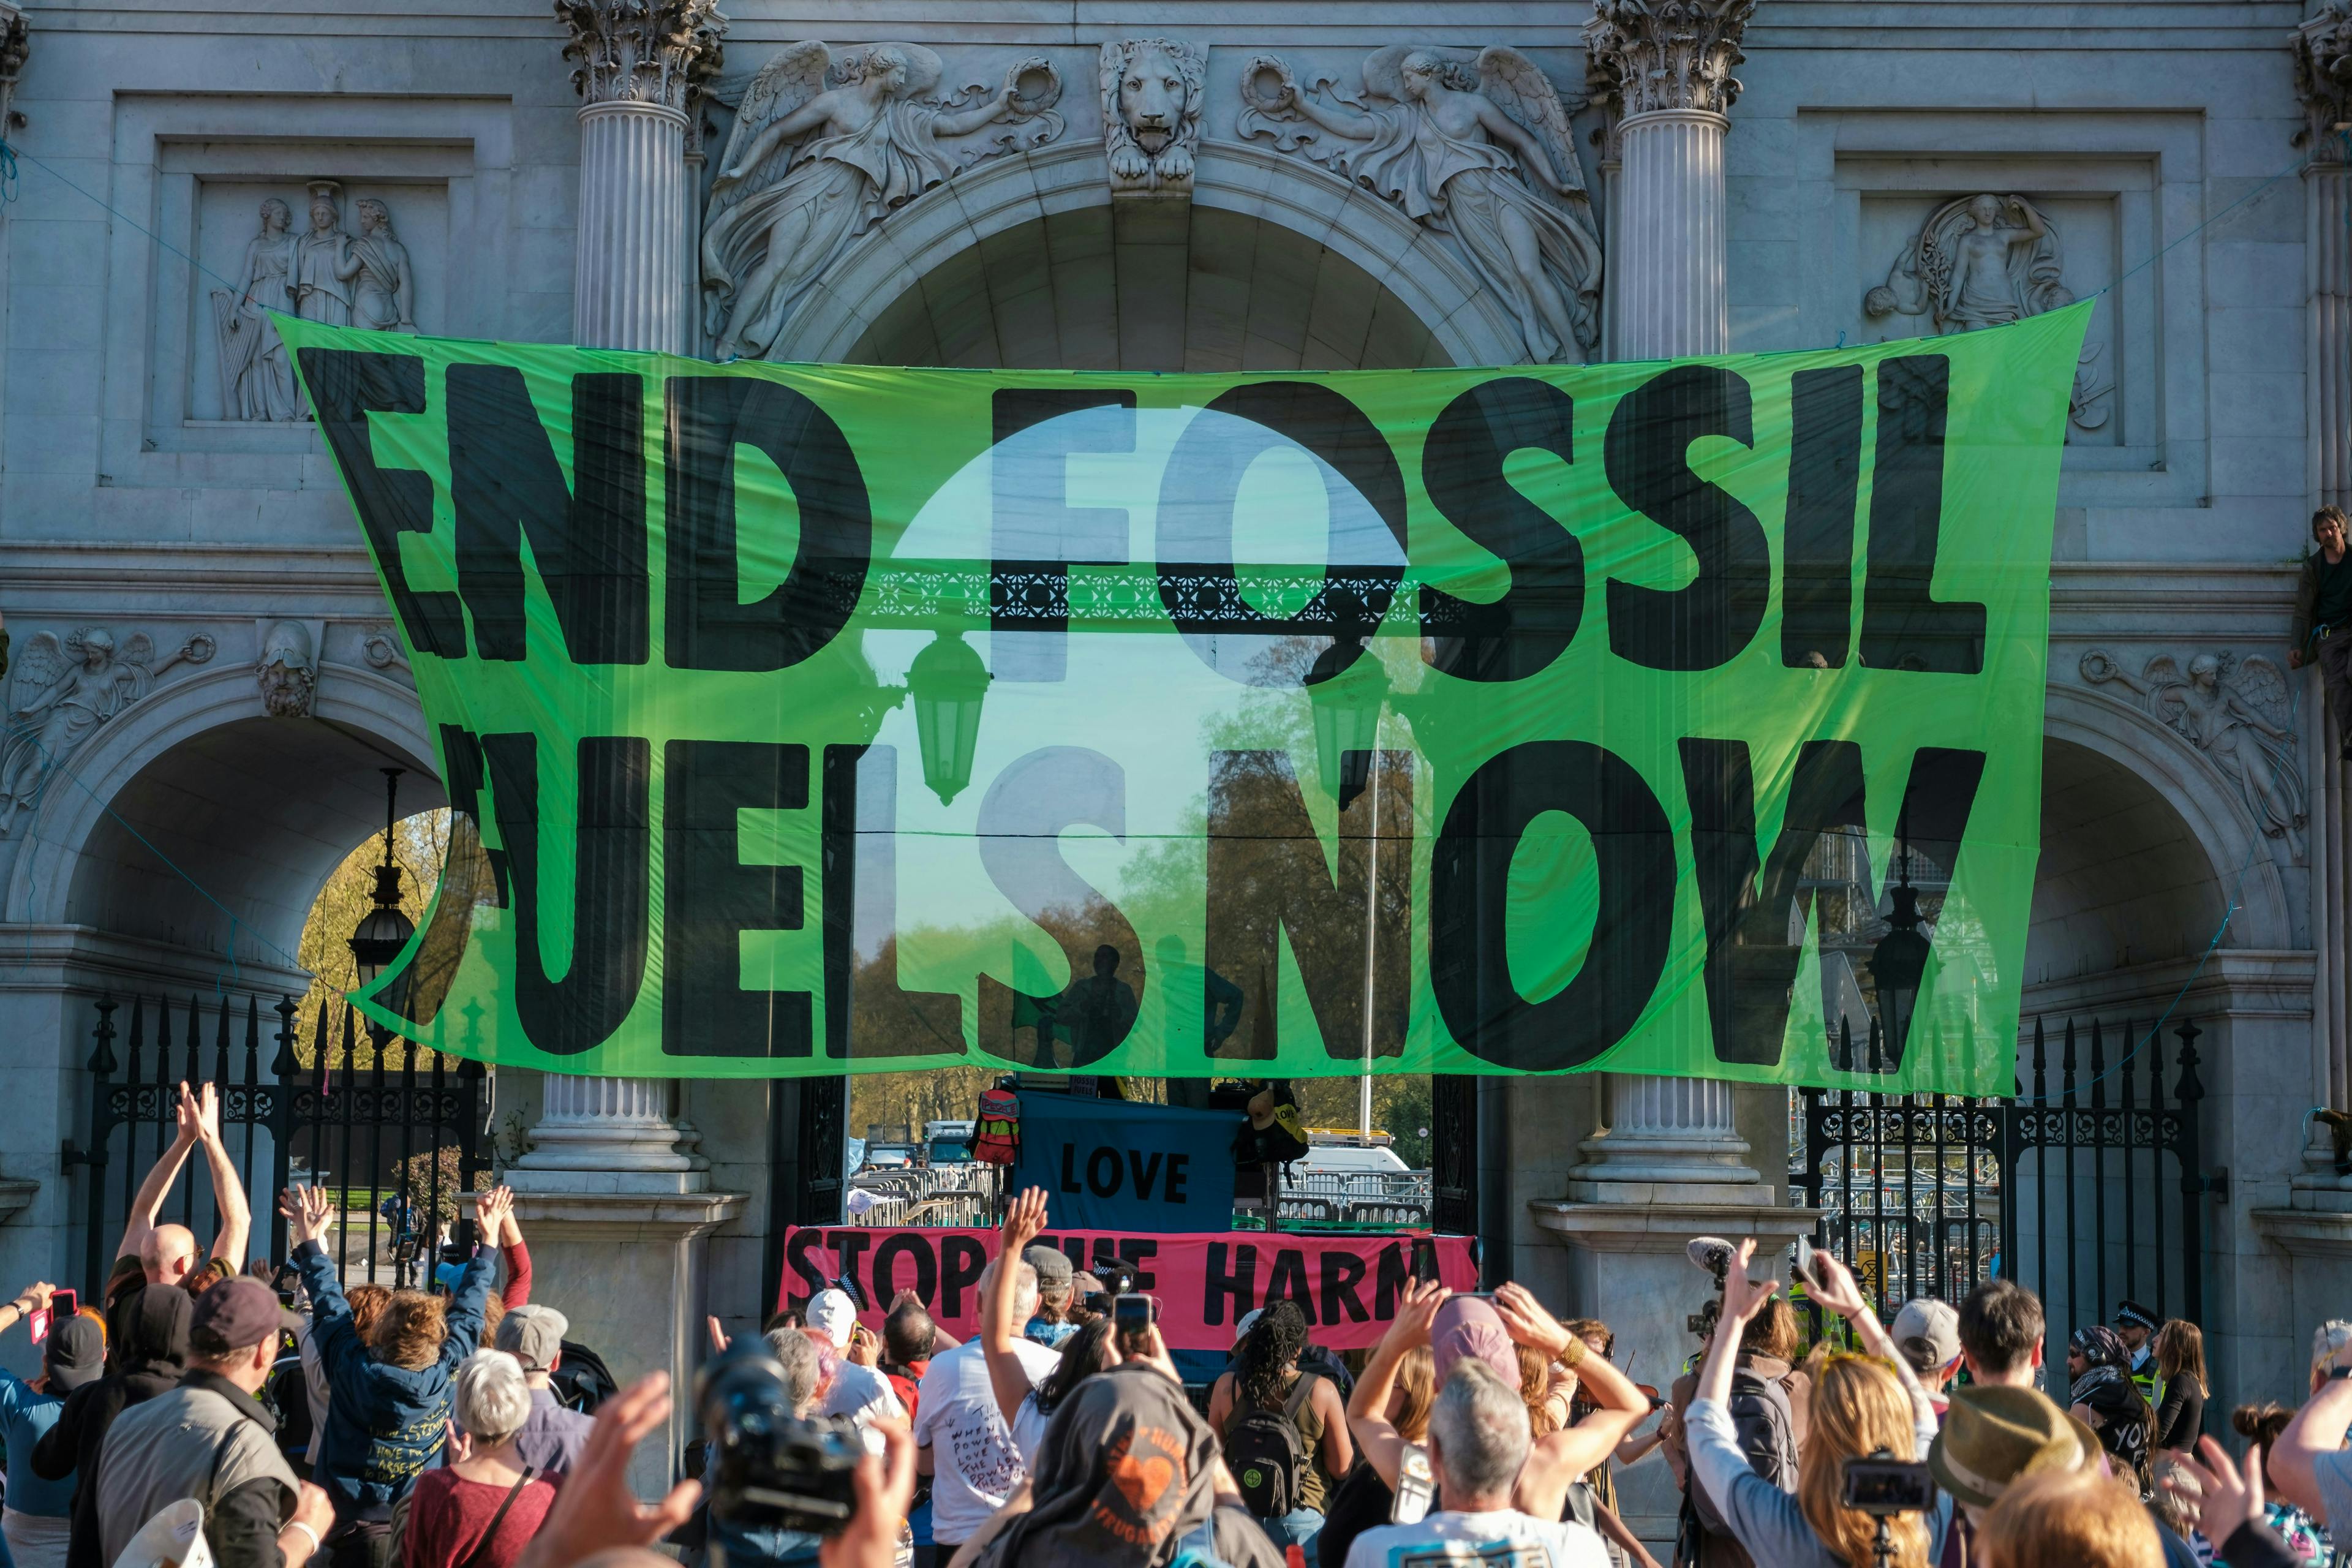 a group of people holding up a green sign